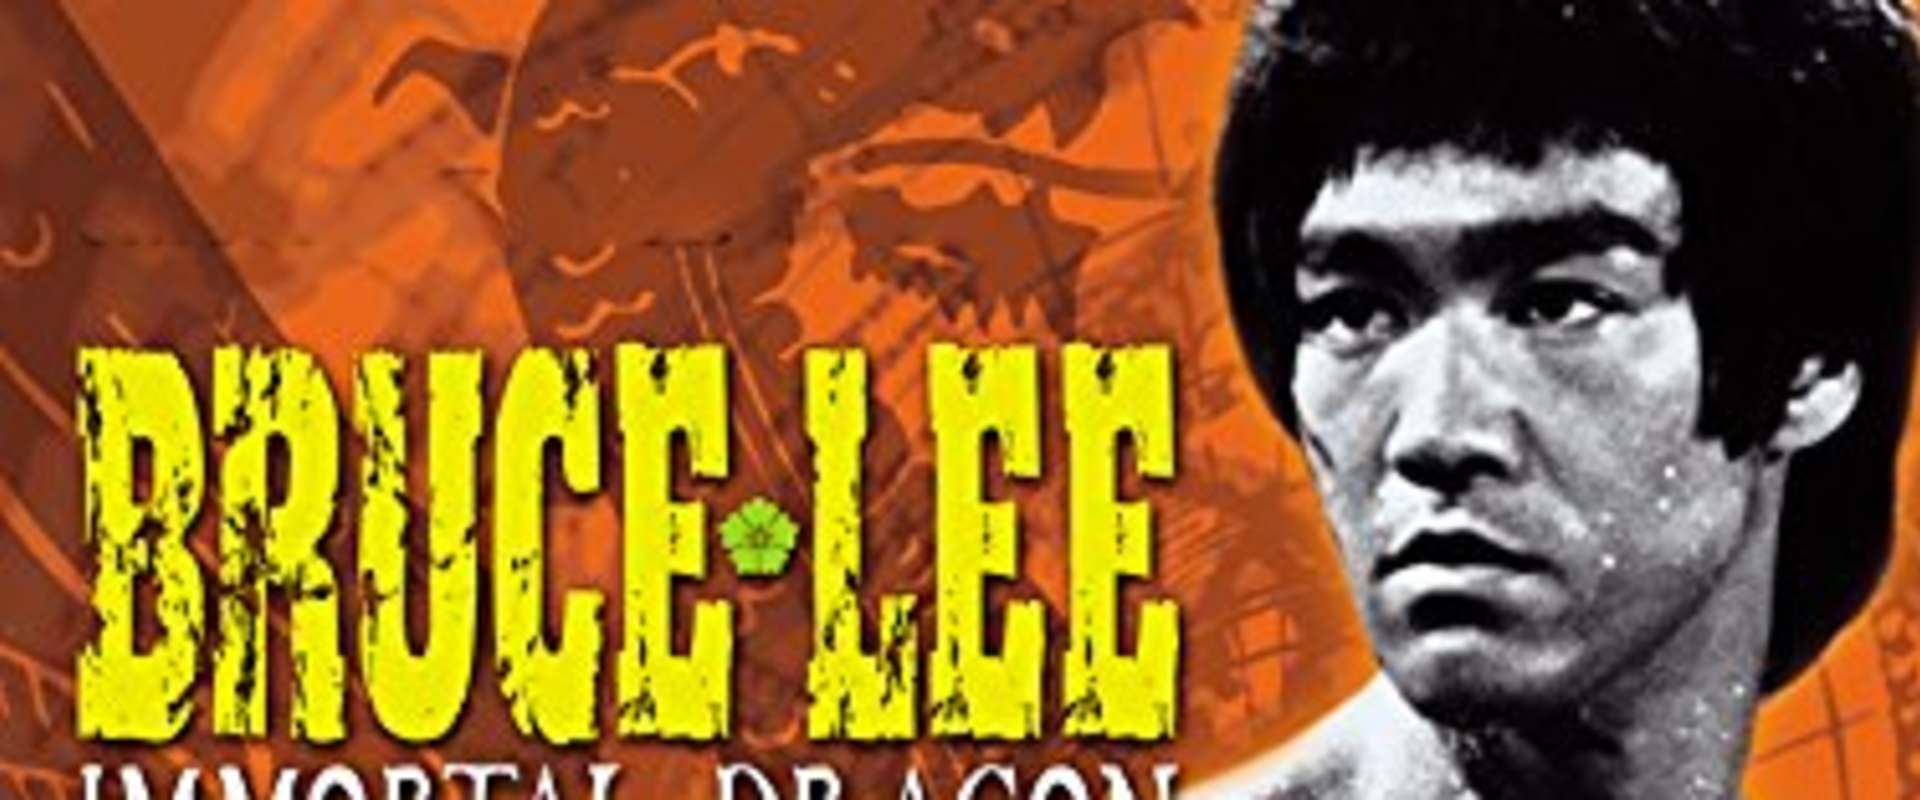 The Unbeatable Bruce Lee background 2